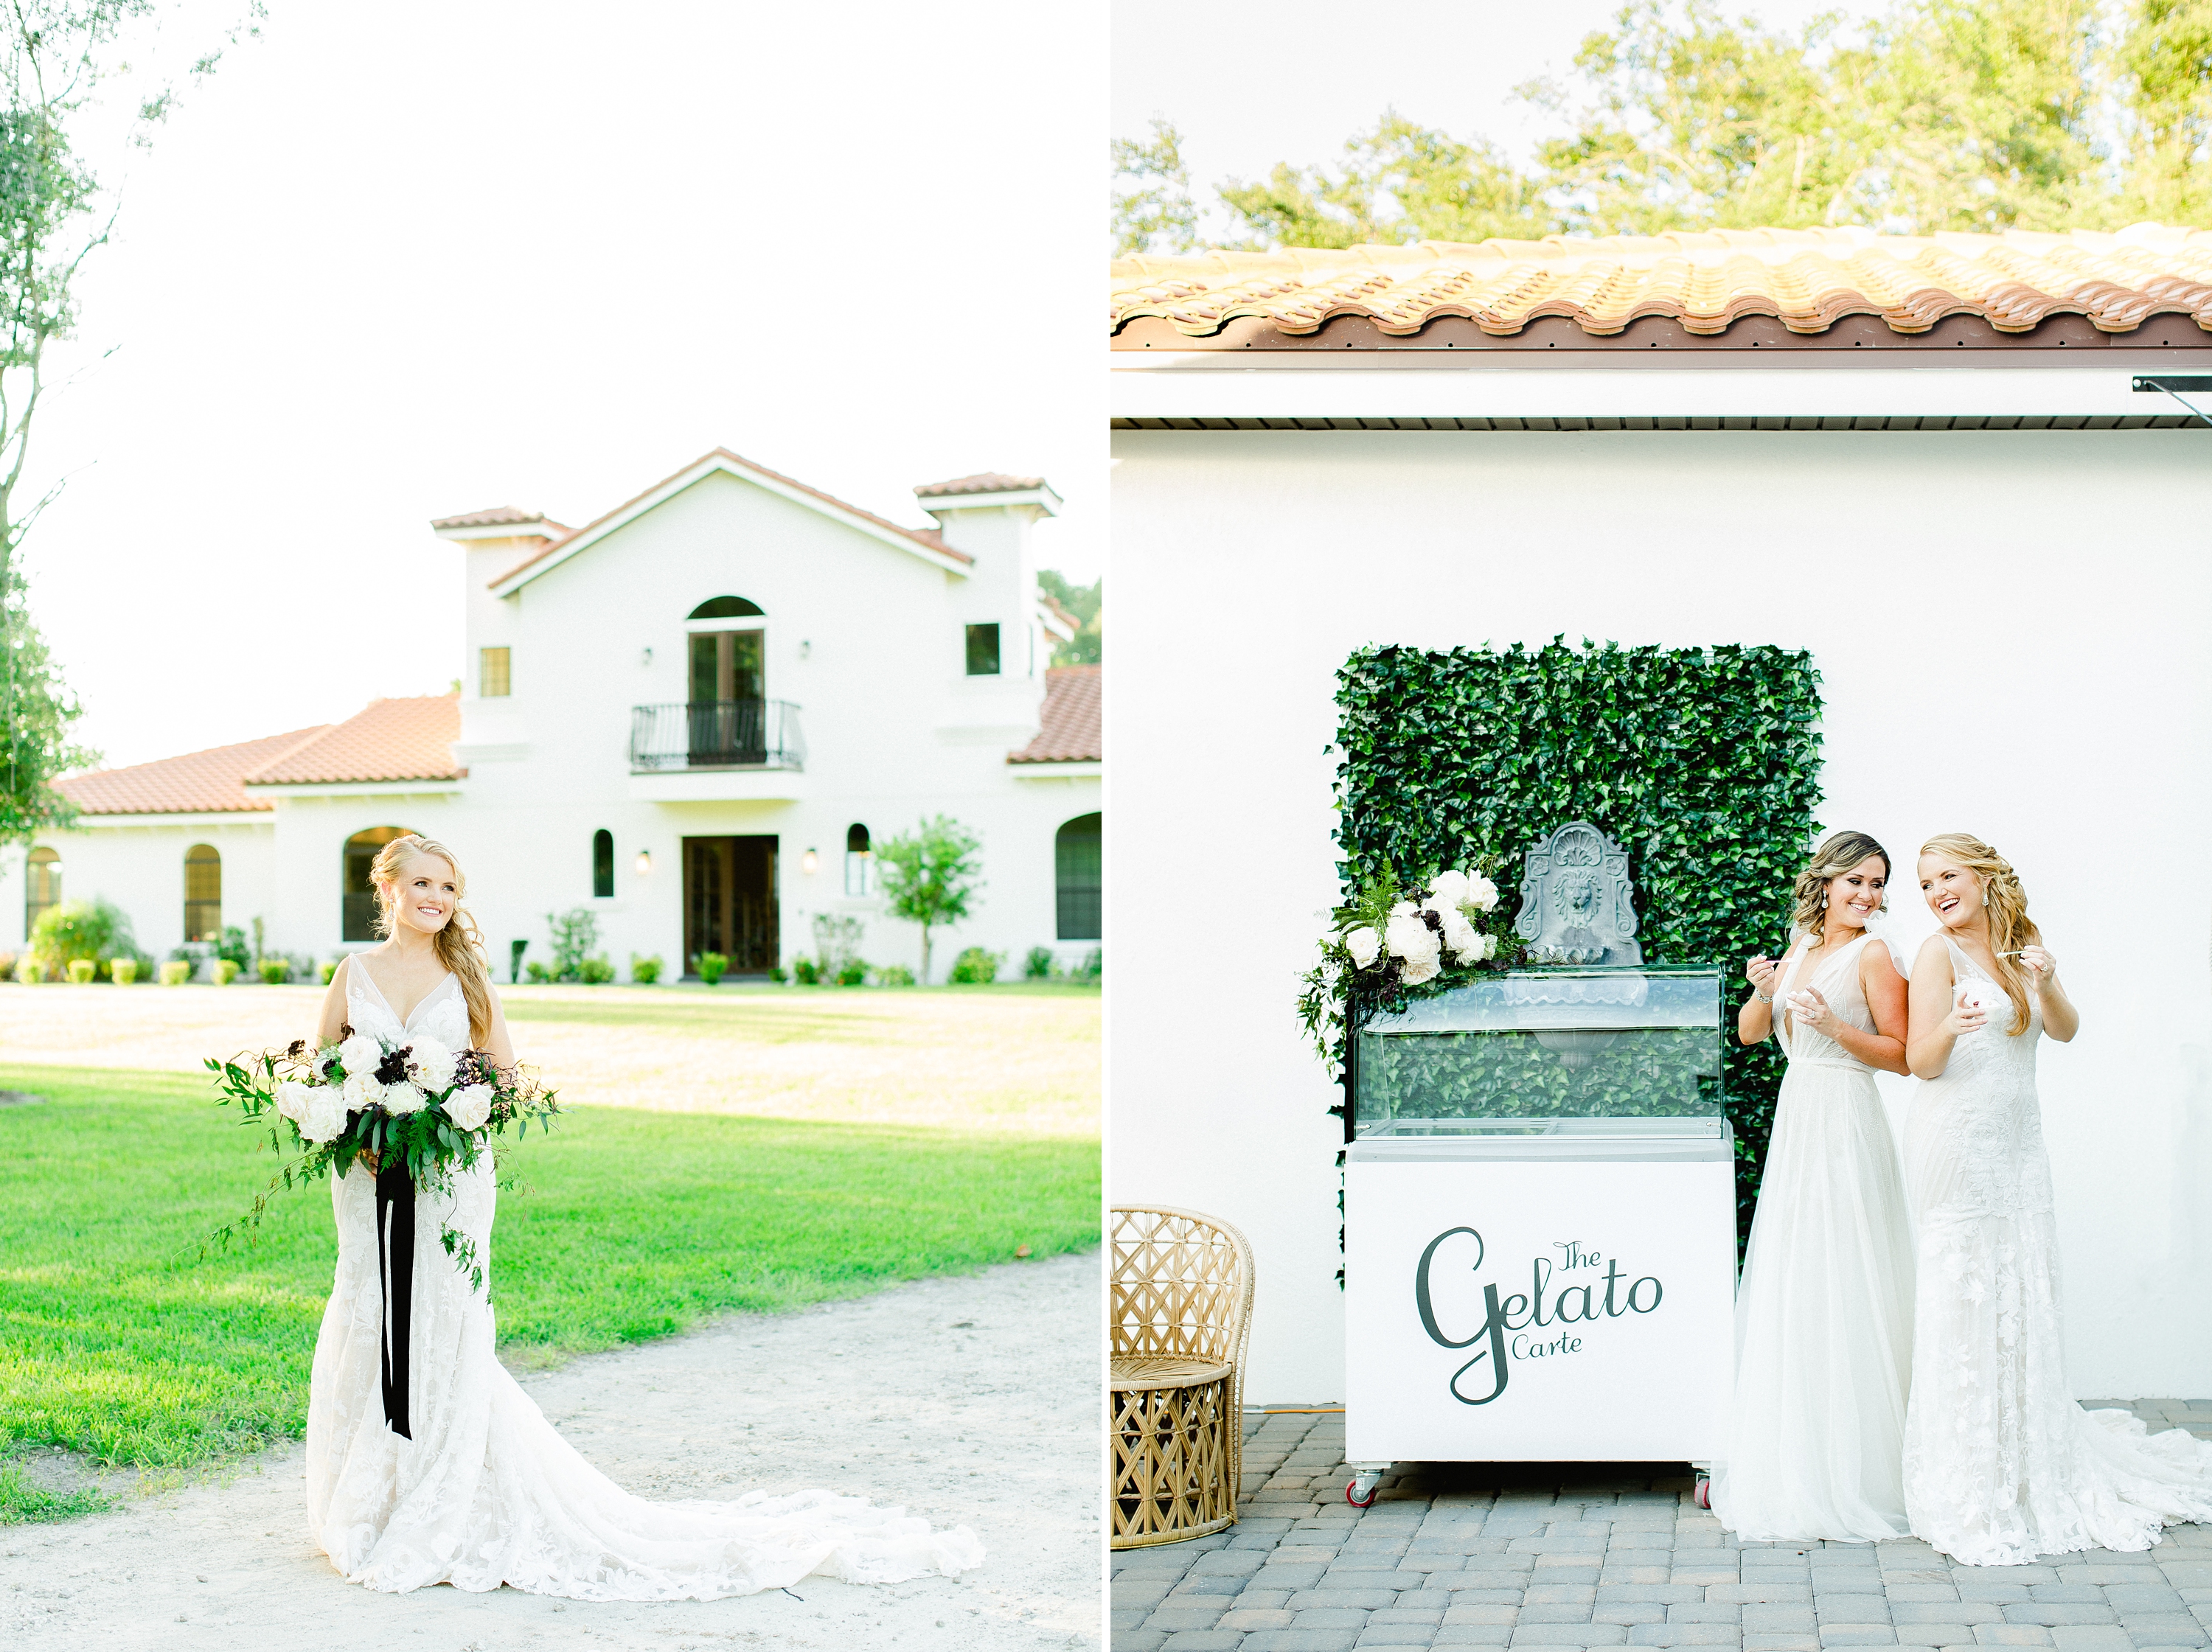 Paradise Springs Styled Shoot | © Ailyn La Torre Photography 2019